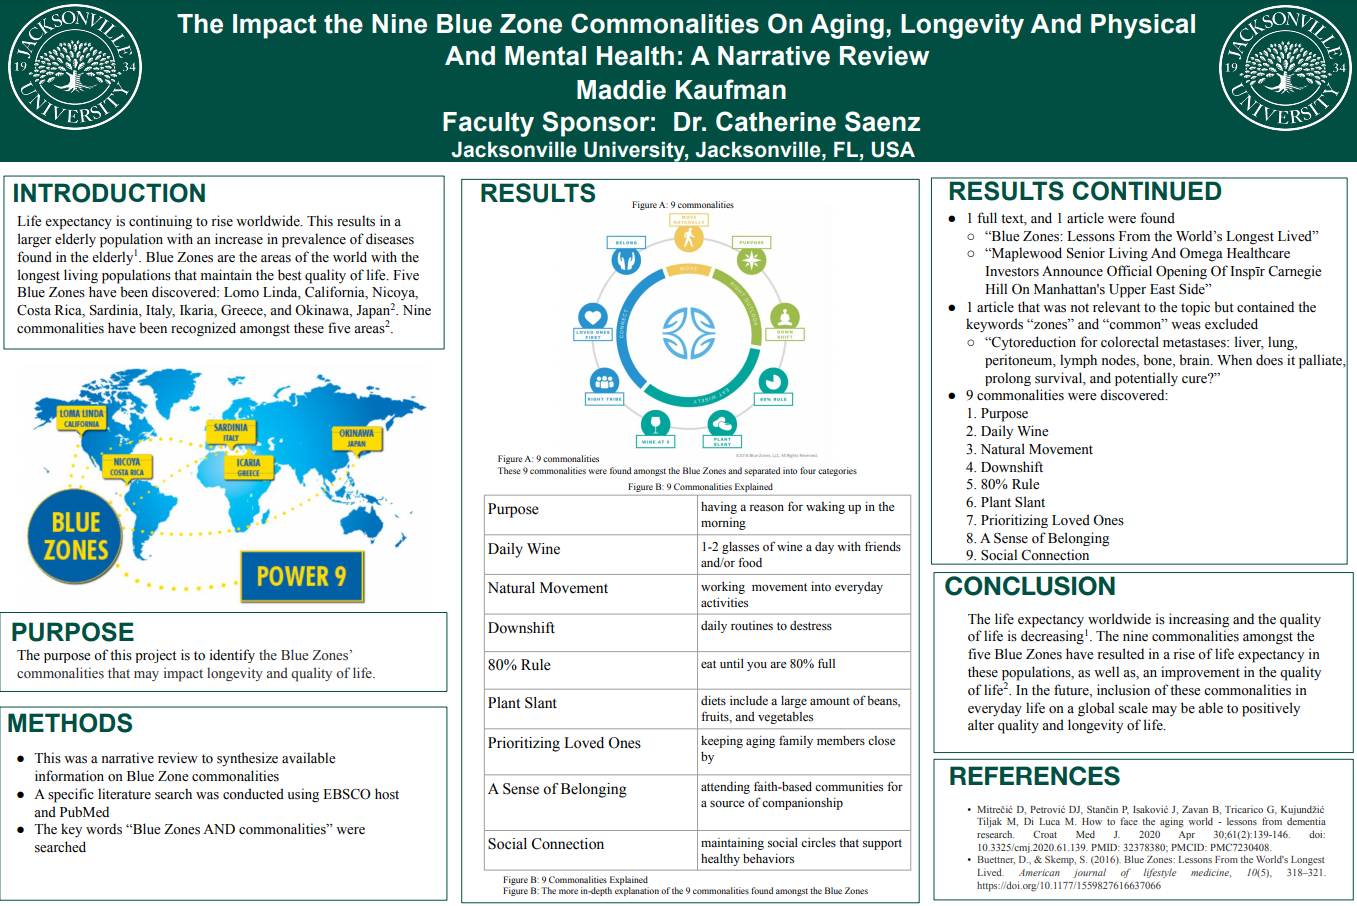 Showcase Image for The Impact the Nine Blue Zone Commonalities On Aging, Longevity And Physical And Mental Health: A Narrative Review